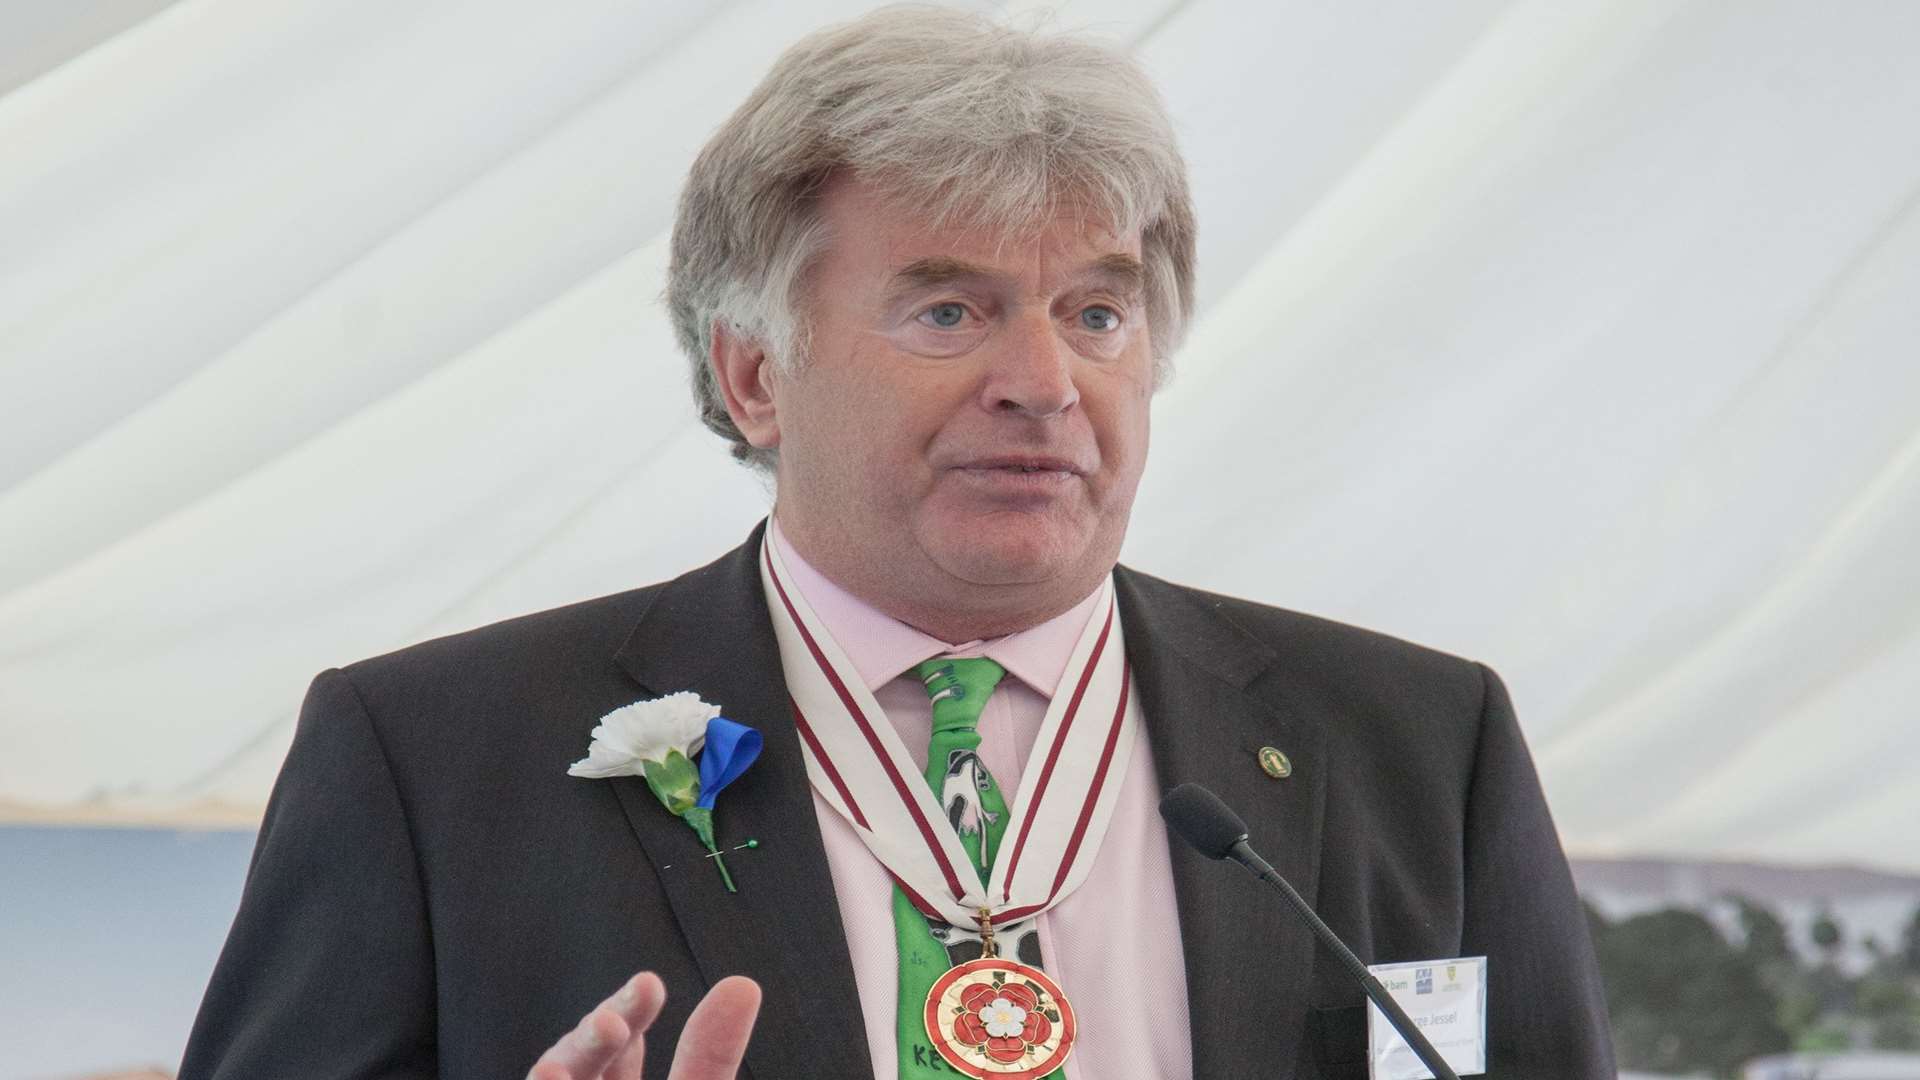 High Sheriff of Kent and arable farmer George Jessel